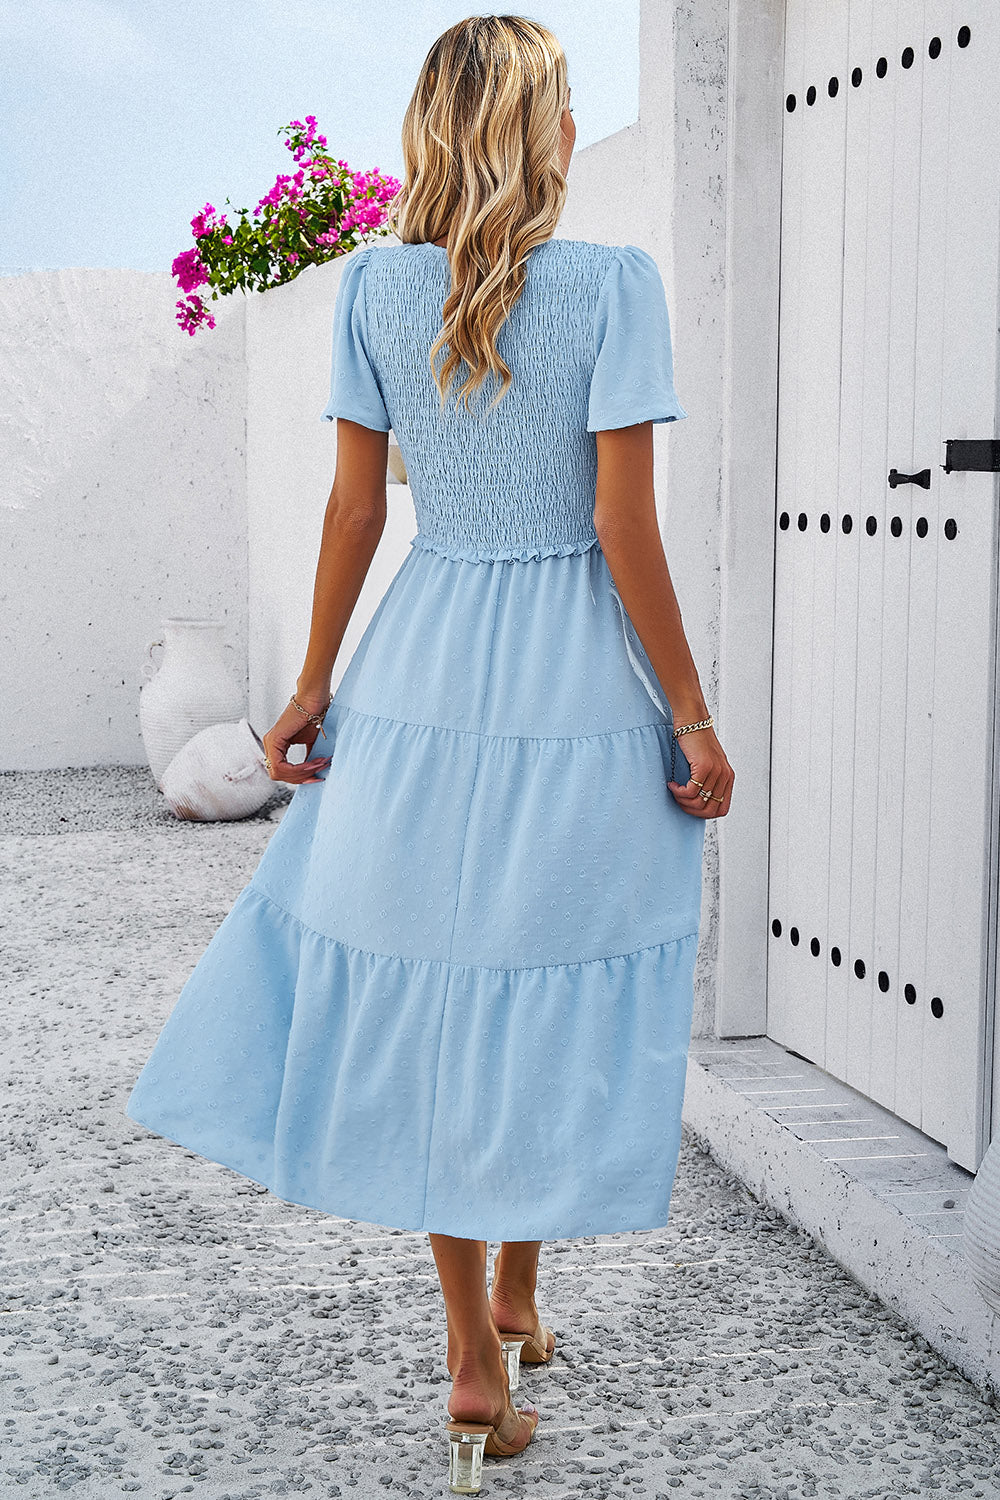 Swiss Dot Dress with a flattering smocked design, available in black, cream, moss, and blue. Perfect for any summer occasion